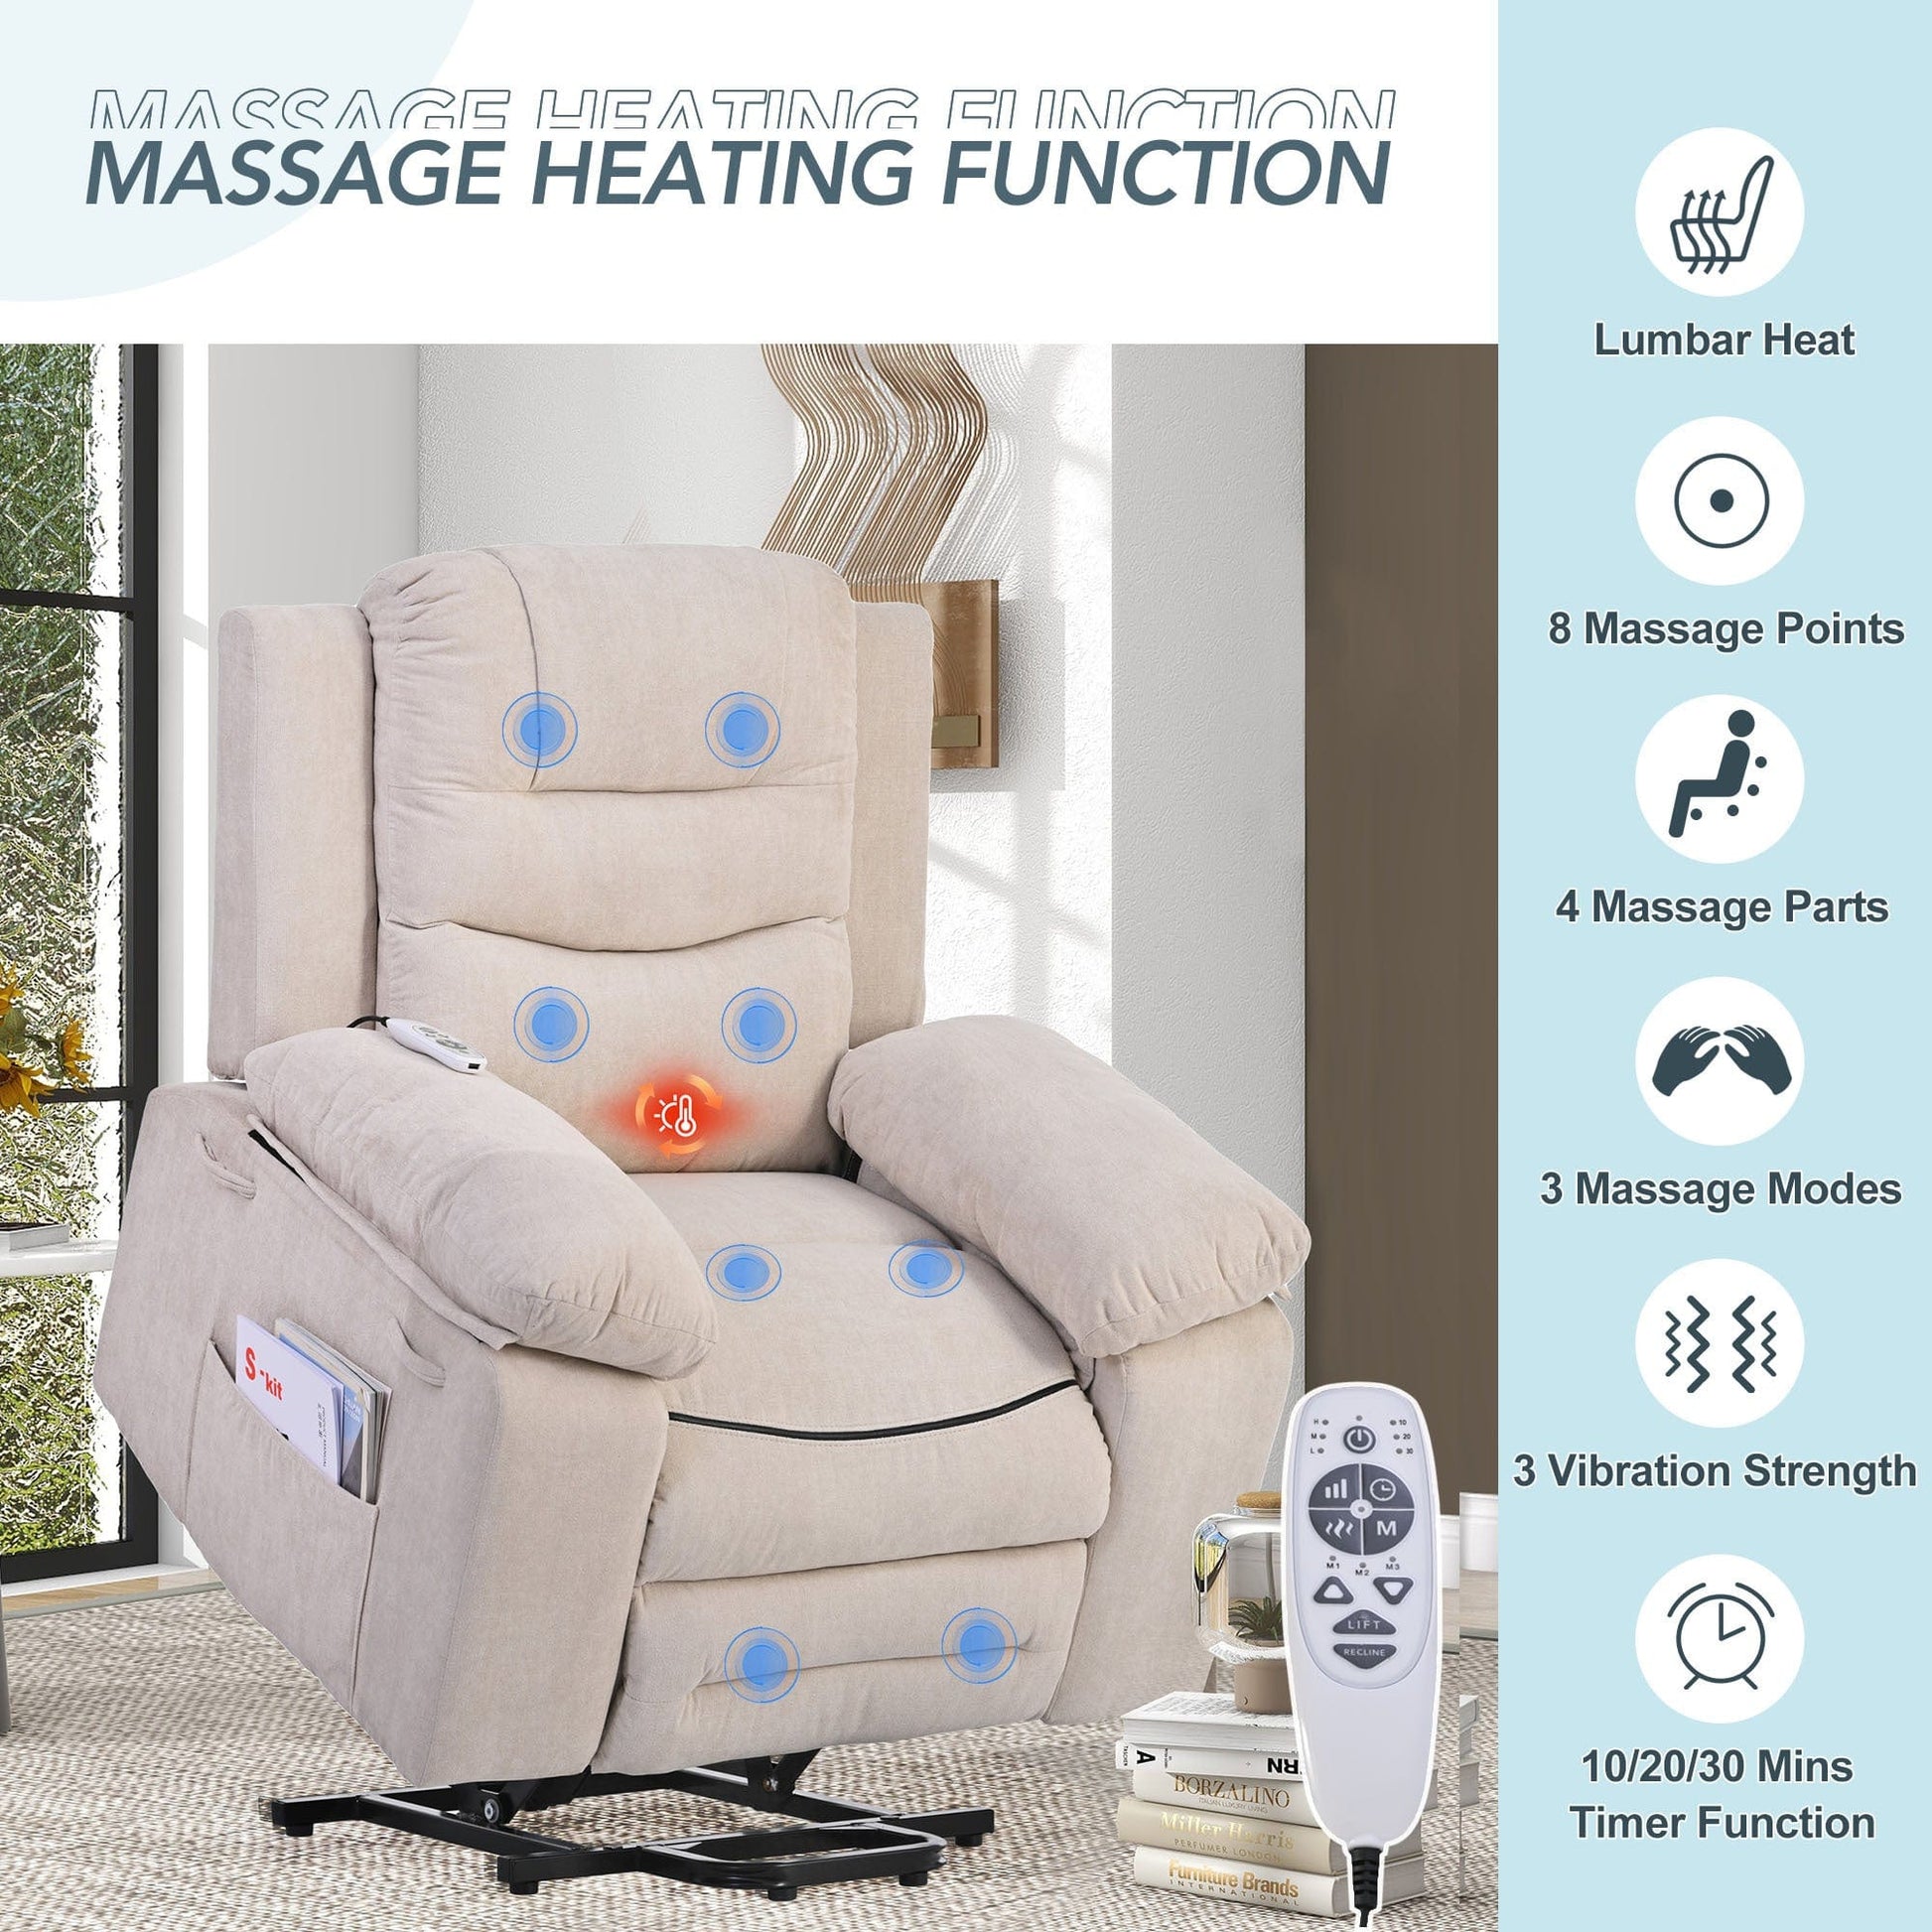 1st Choice Furniture Direct Power Motion Recliner 1st Choice Power Recliner Lift Chair for Living Room in Beige Finish